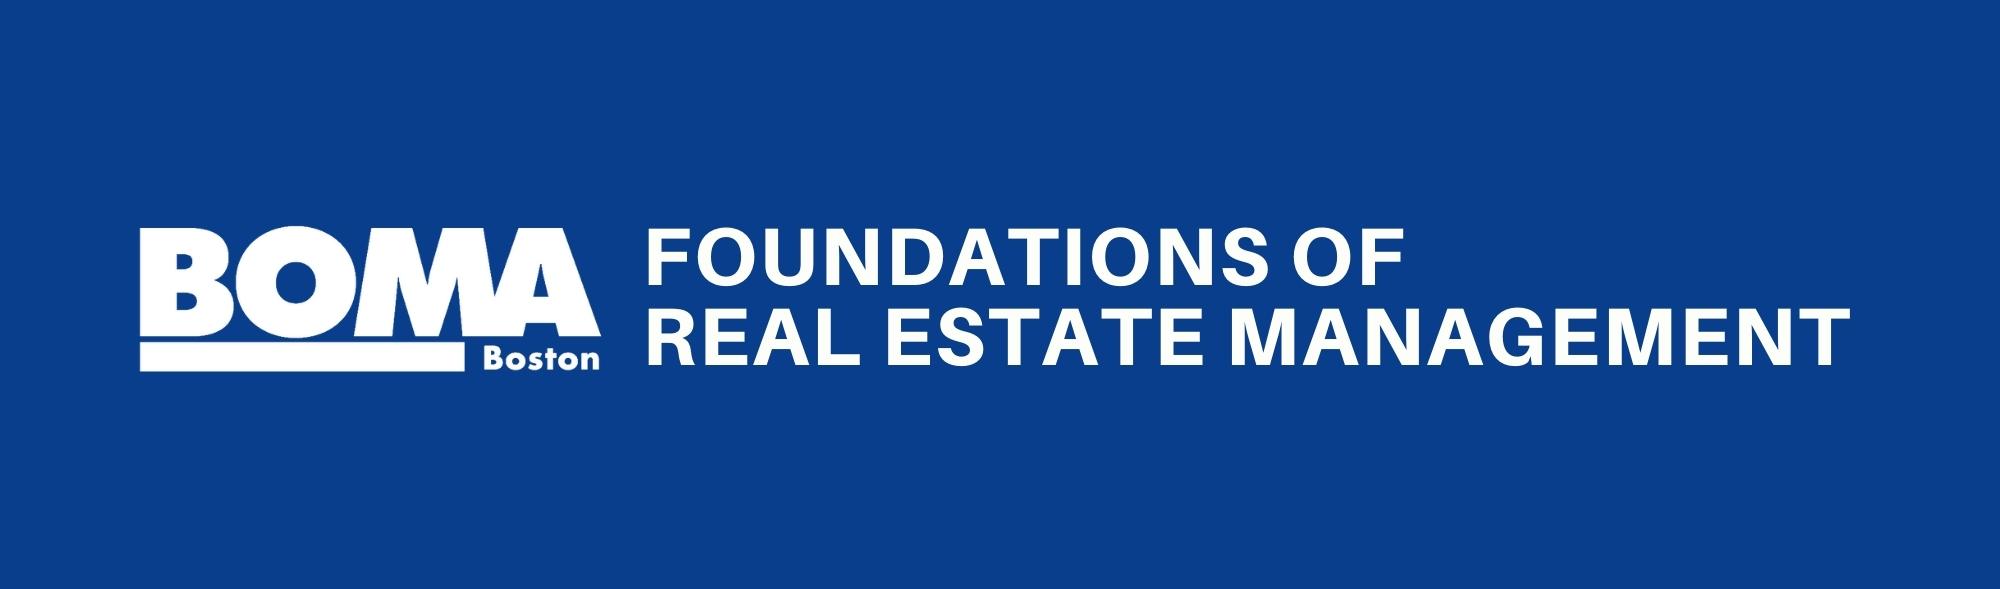 2022 BOMA Foundations of Real Estate Management